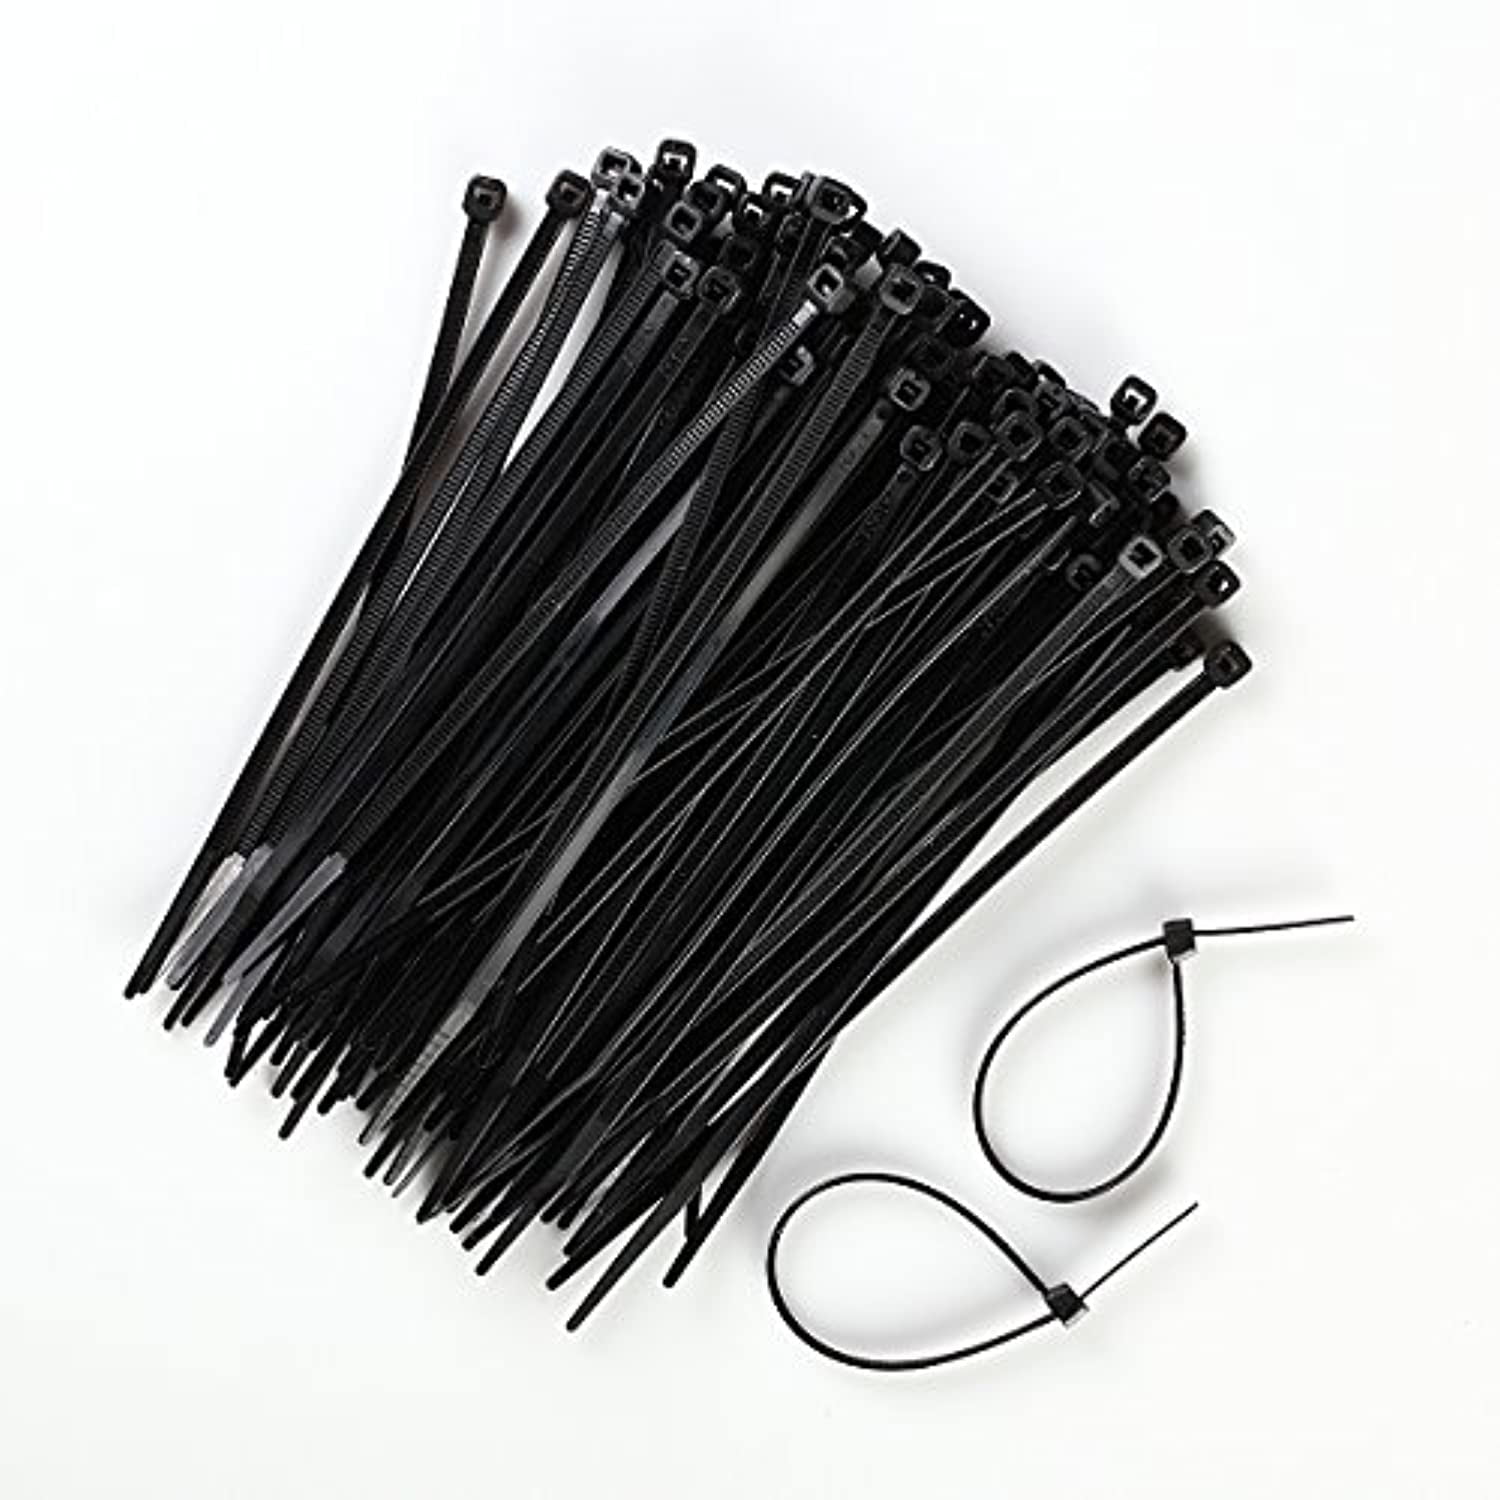 NEW BLACK 200 PCS 12 INCH ZIP TIES NYLON 40 LBS UV WEATHER RESISTANT WIRE CABLE 